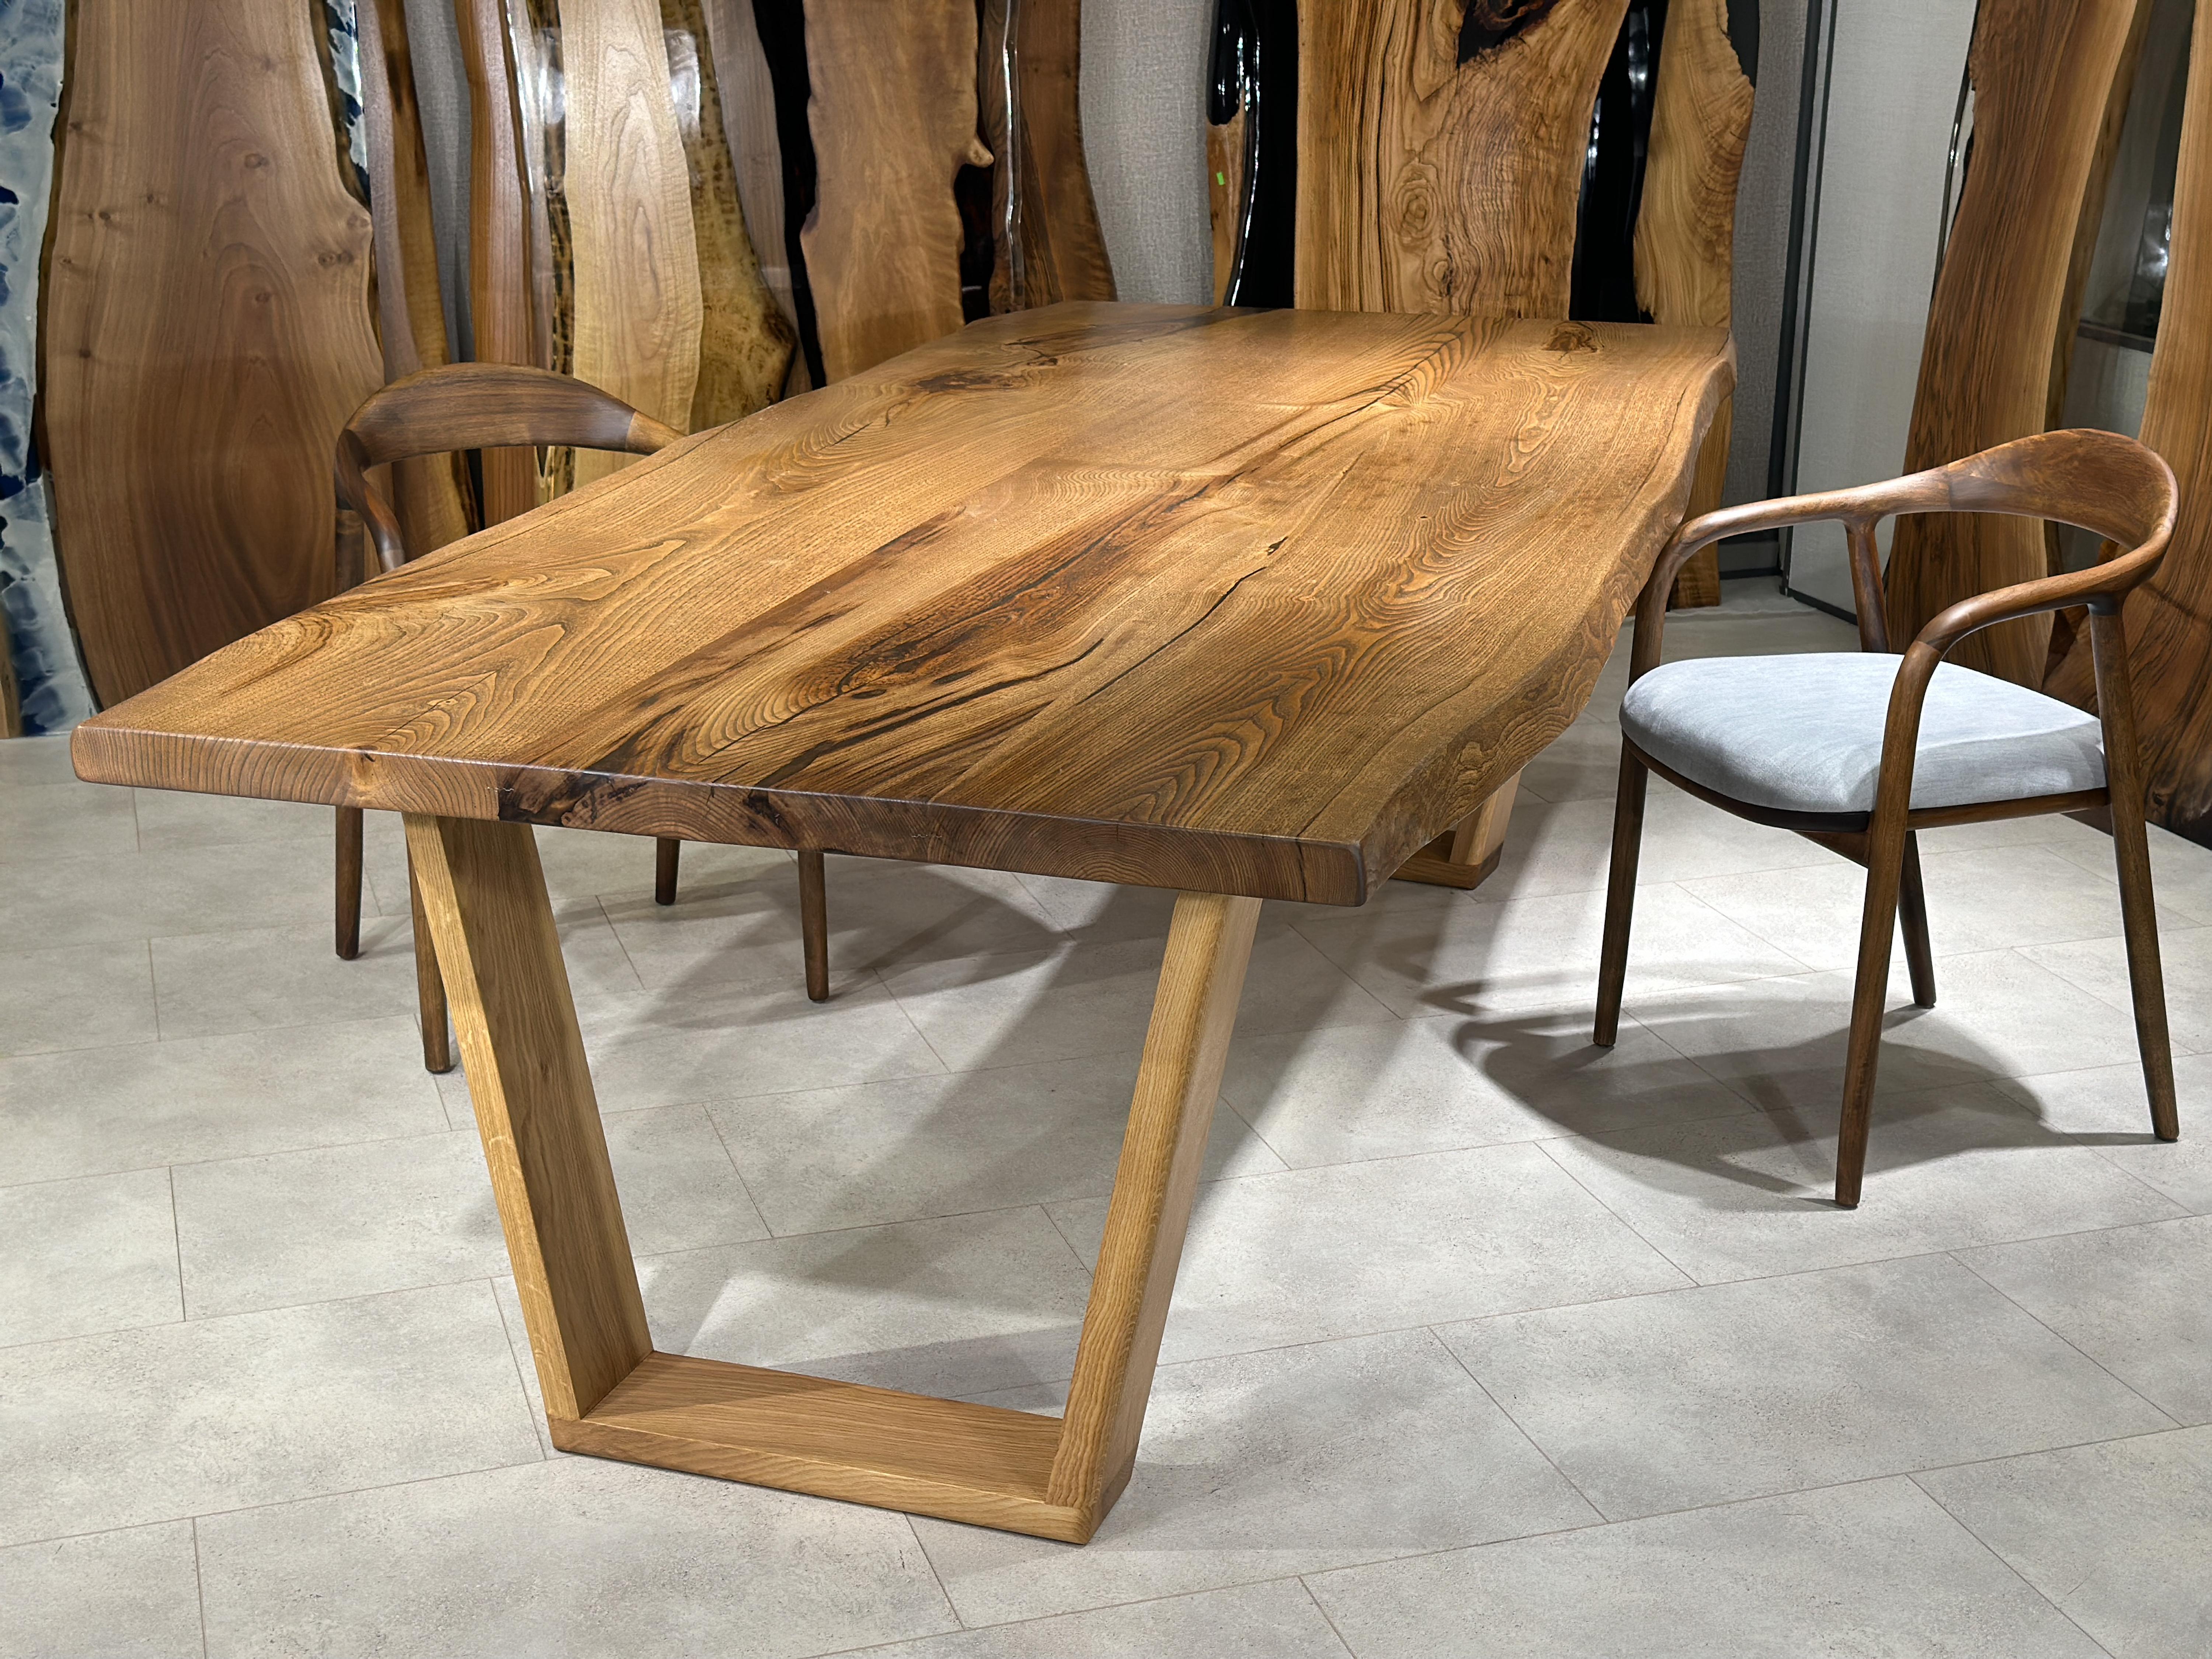 Woodwork Chestnut Solid Wood Live Edge Custom Dining Kitchen Table For Sale